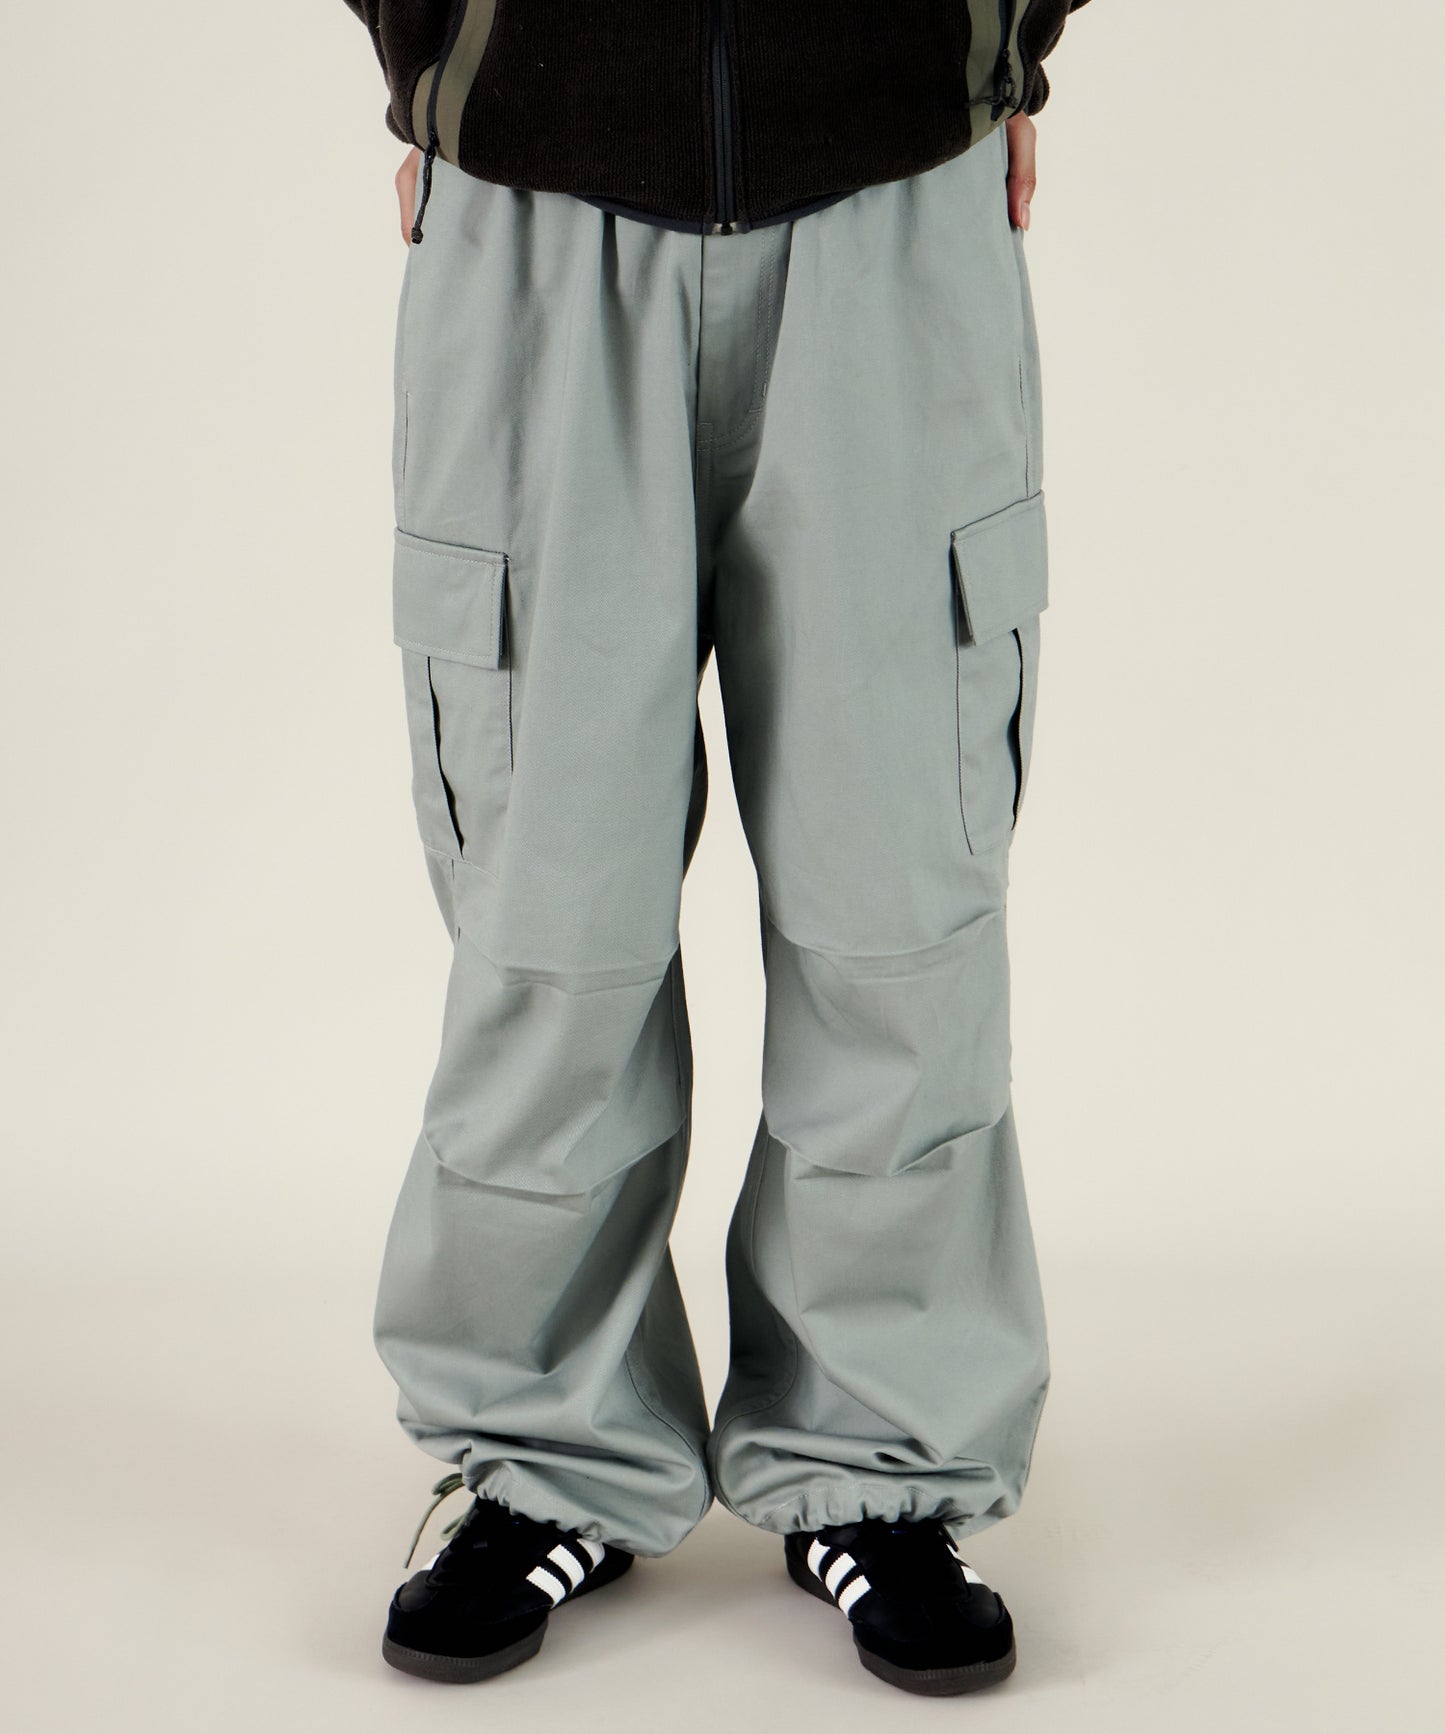 SNOW WORKERS PANTS / サイド カーゴポケット ルーズシルエット カラー スノーワークパンツ 柄86